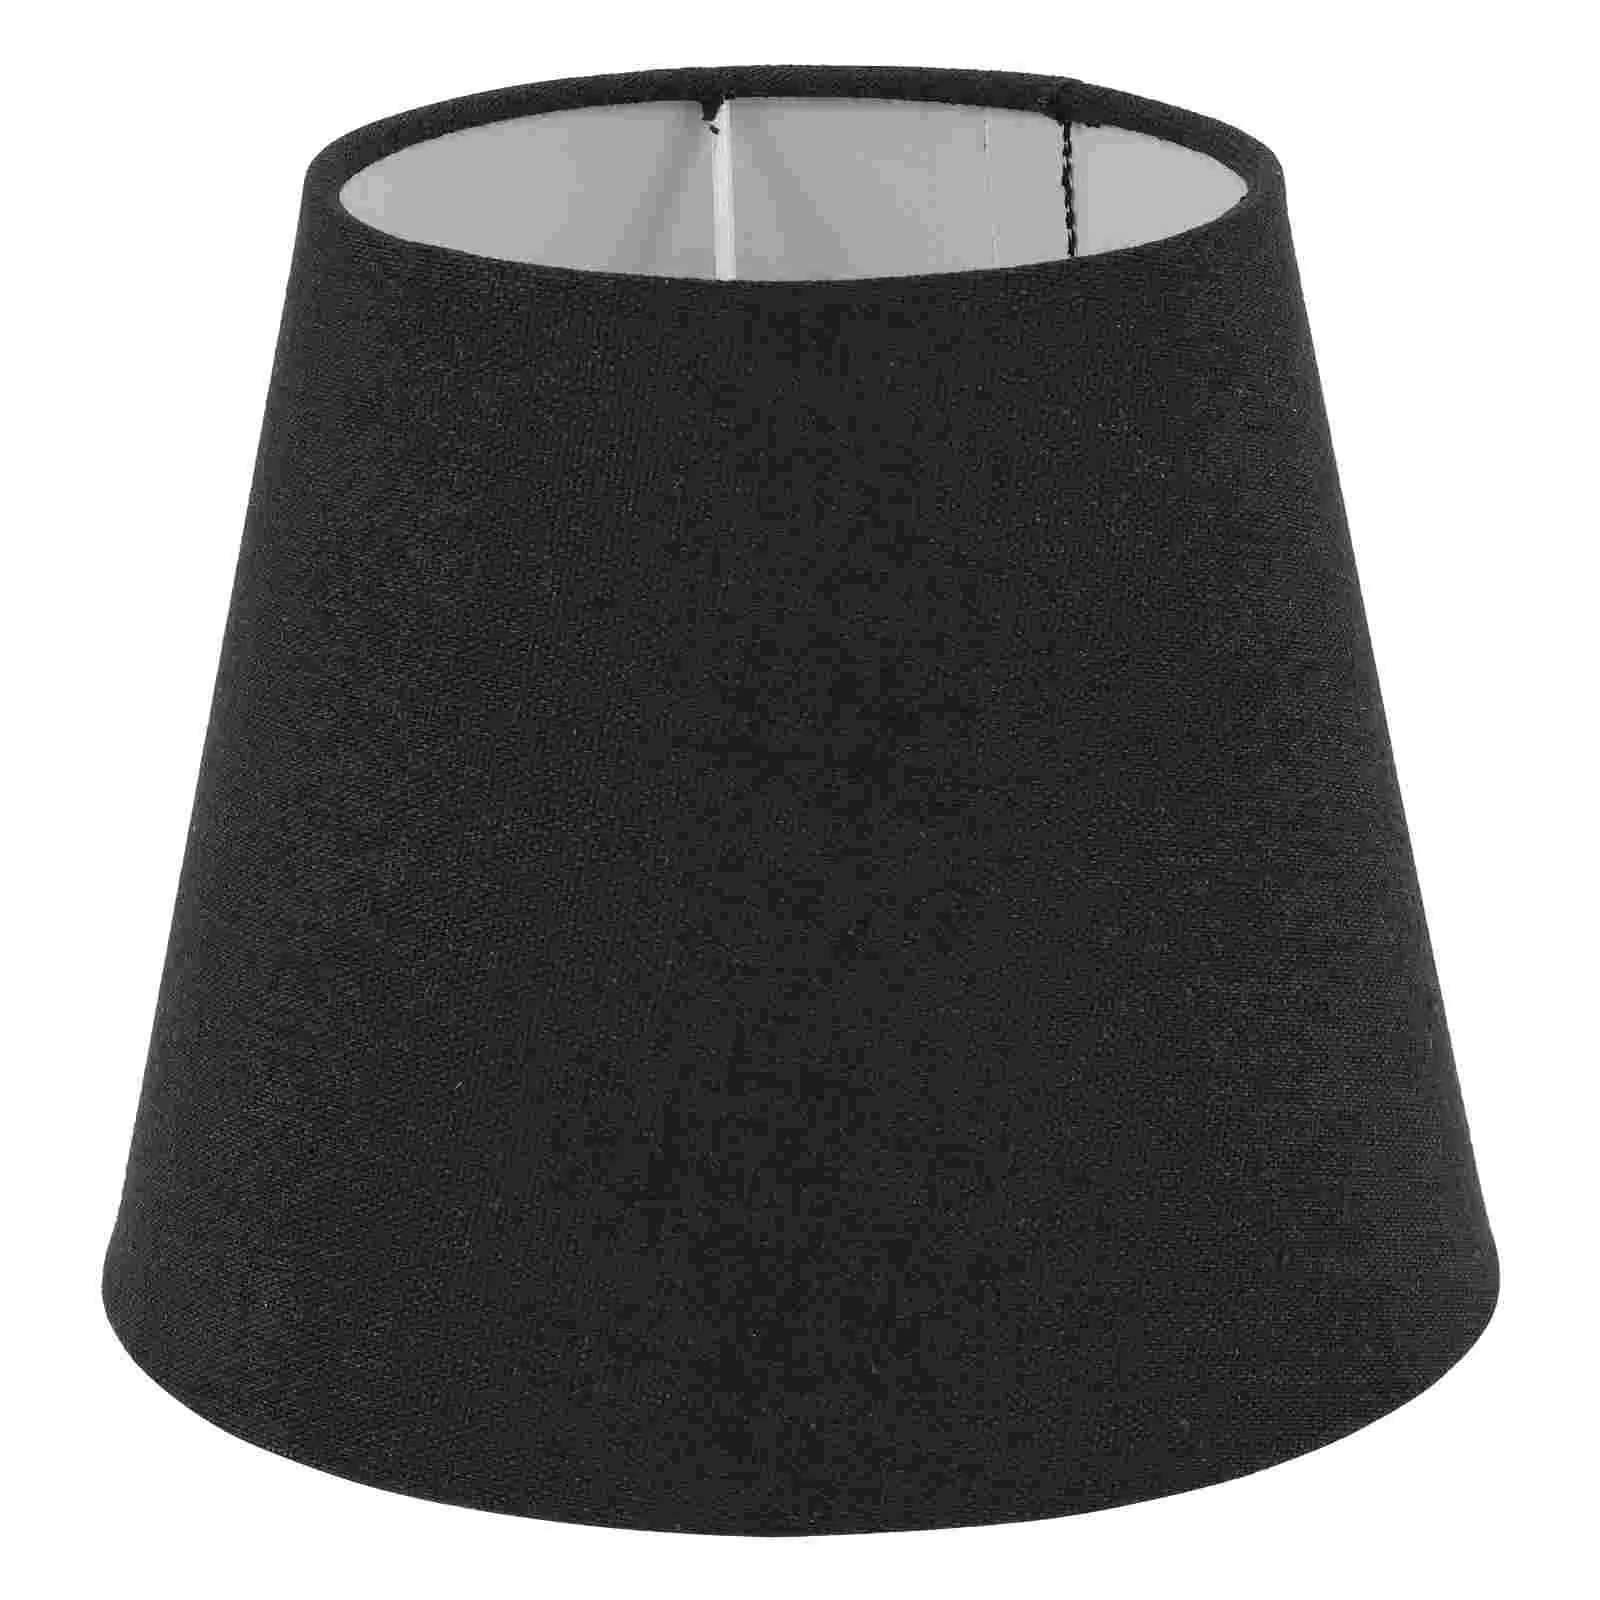 Fabric Lamp Shades E14 Cone Barrel Lampshade Medium Drum Lampshades Replacement Clip Light Bulb Cover Table Lamp Bedside